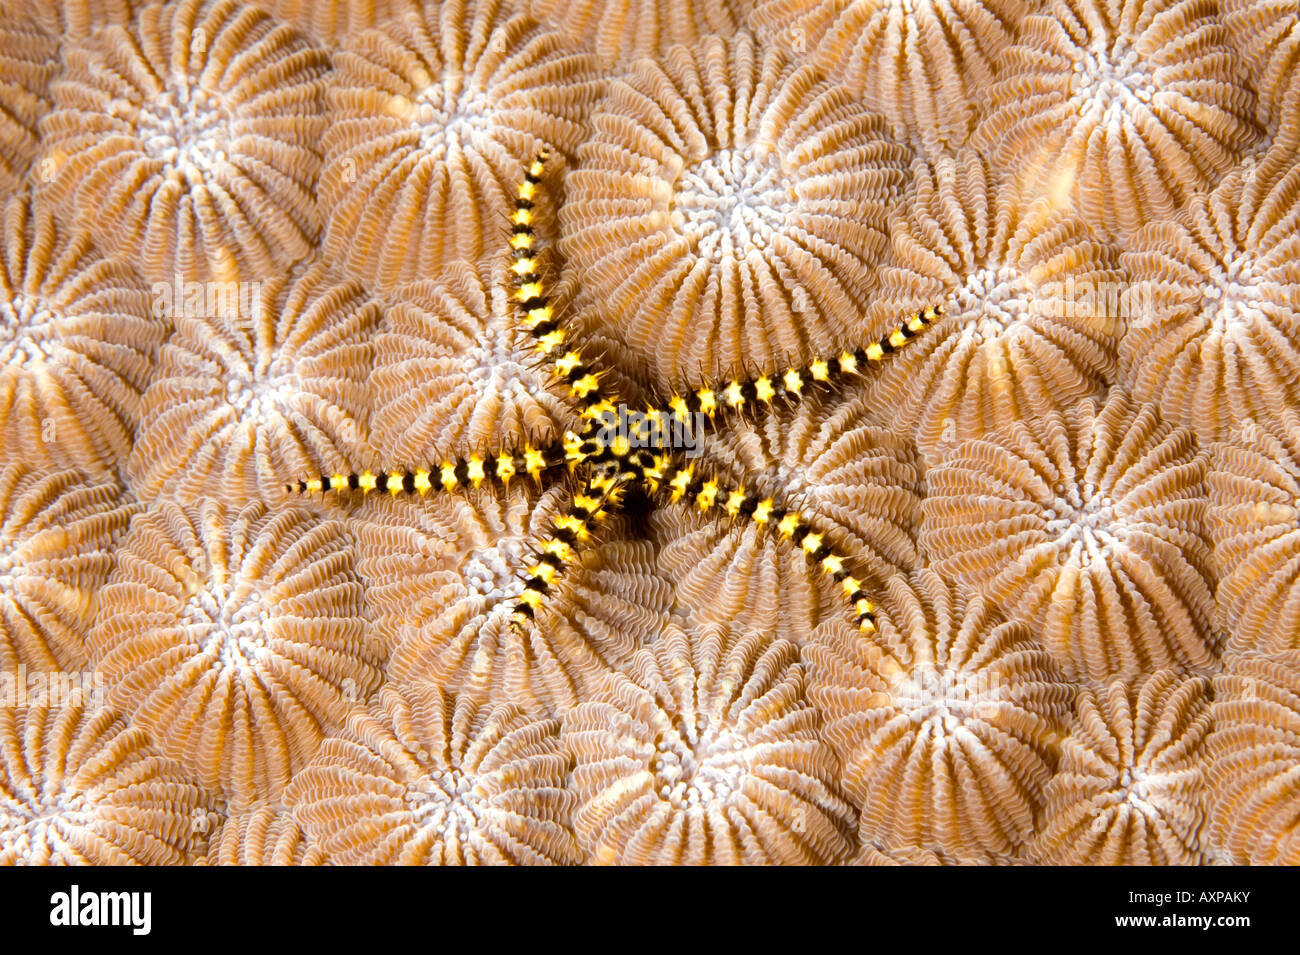 Brittle star, Ophiomastix sp on hard coral Stock Photo